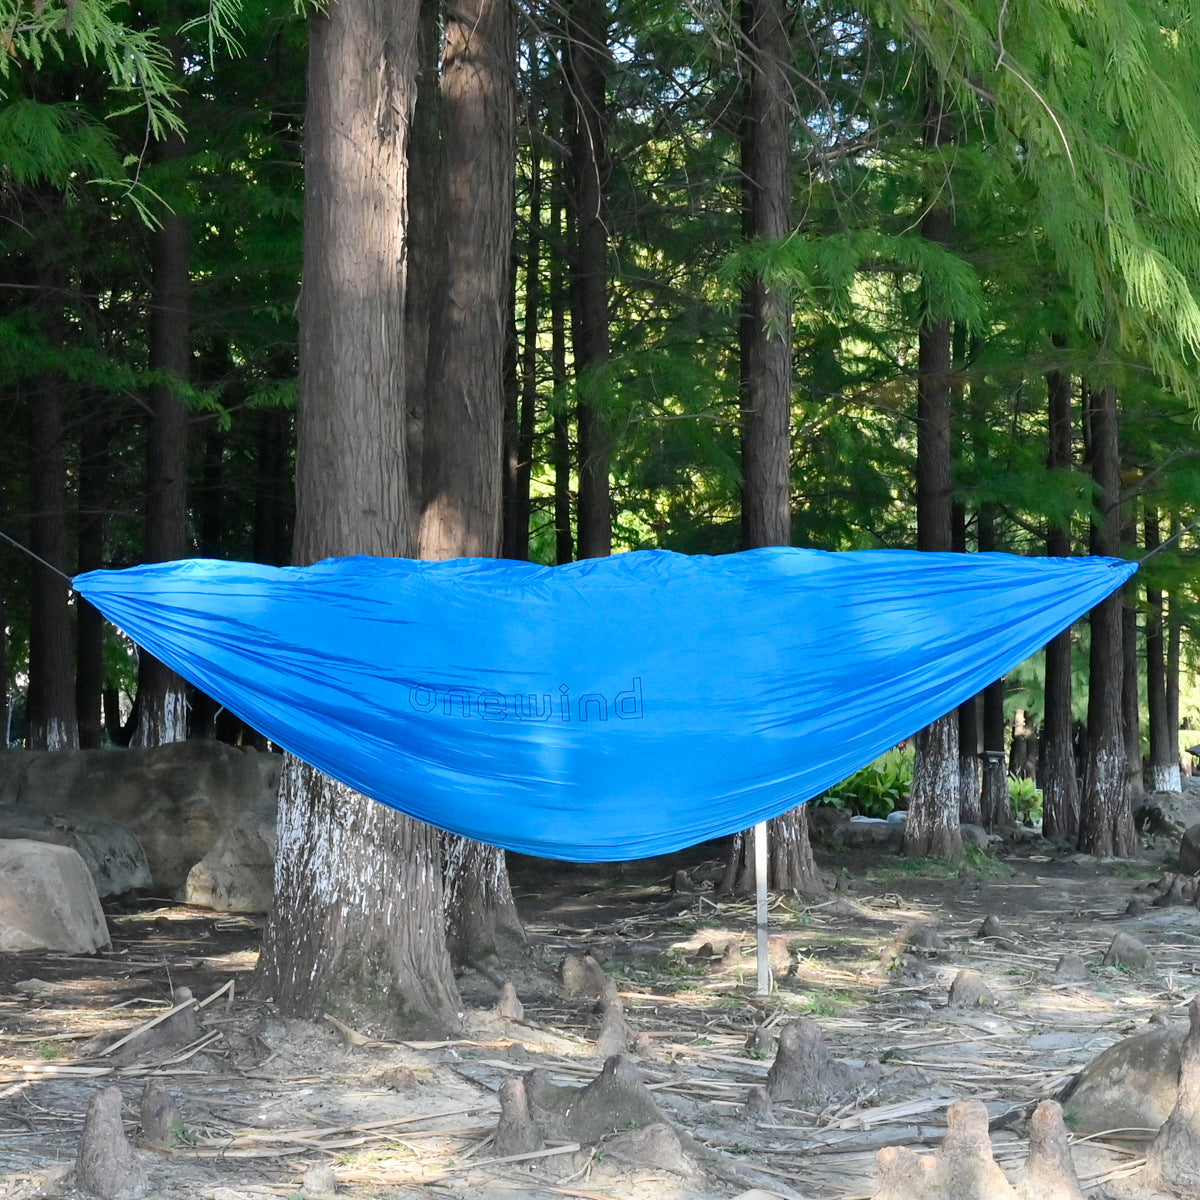 Best Hammocks for Camping | Onewind Outdoors